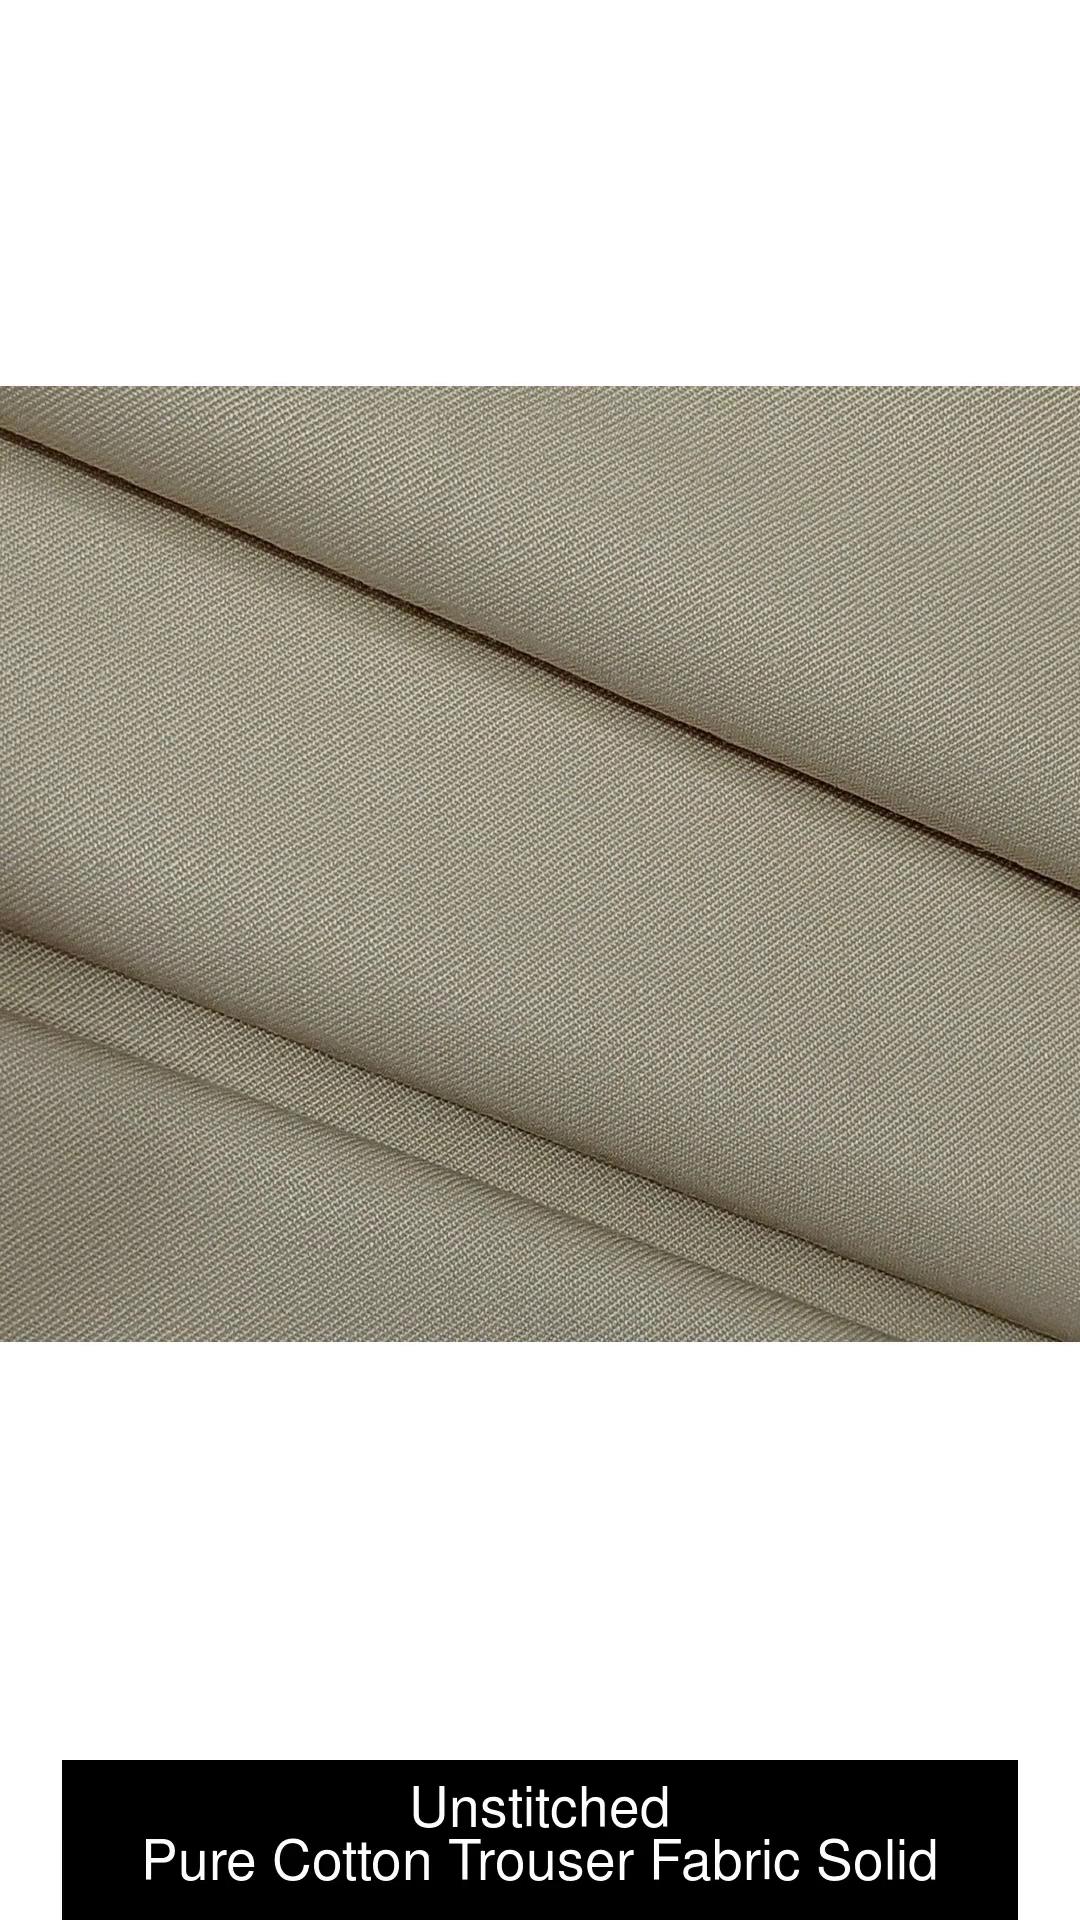 Trouser fabric suiting fabric Dobby Fabrics in Ahmedabad  TS Textiles